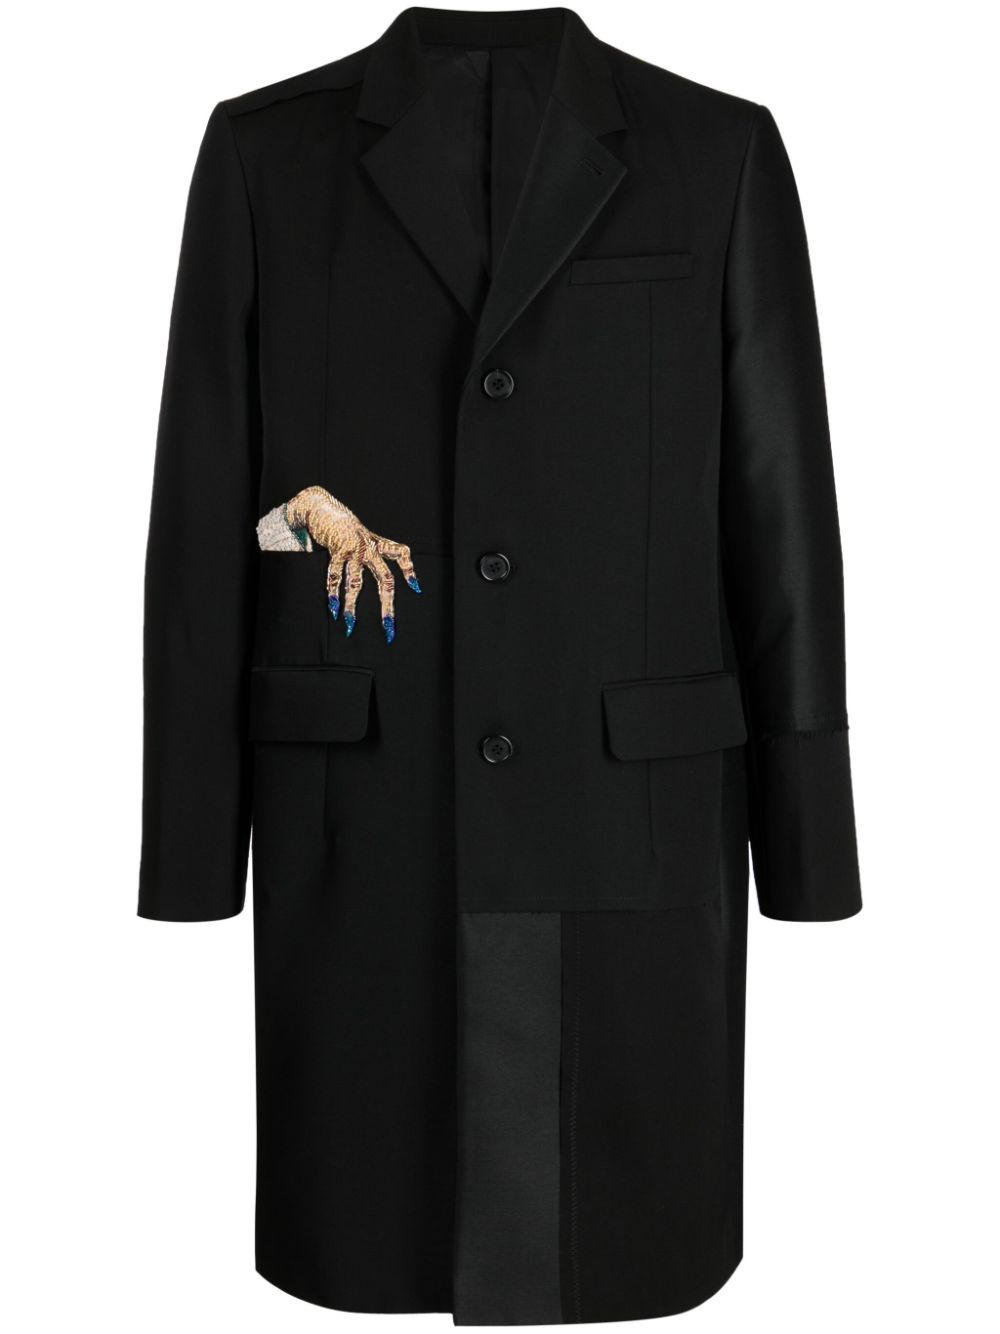 UNDERCOVER BEAD-EMBELLISHED SINGLE-BREASTED COAT